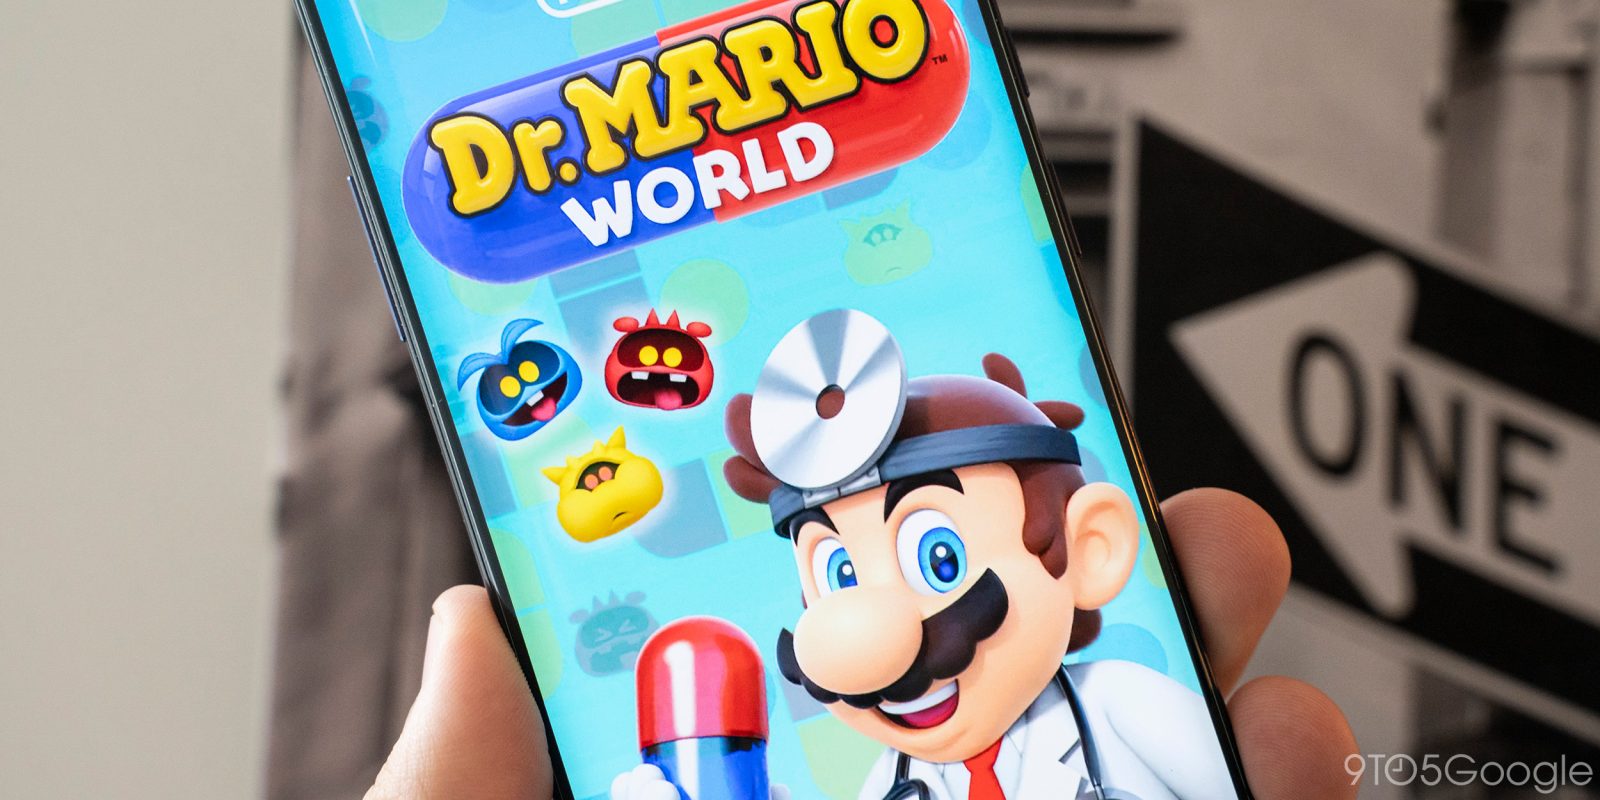 dr. mario world android